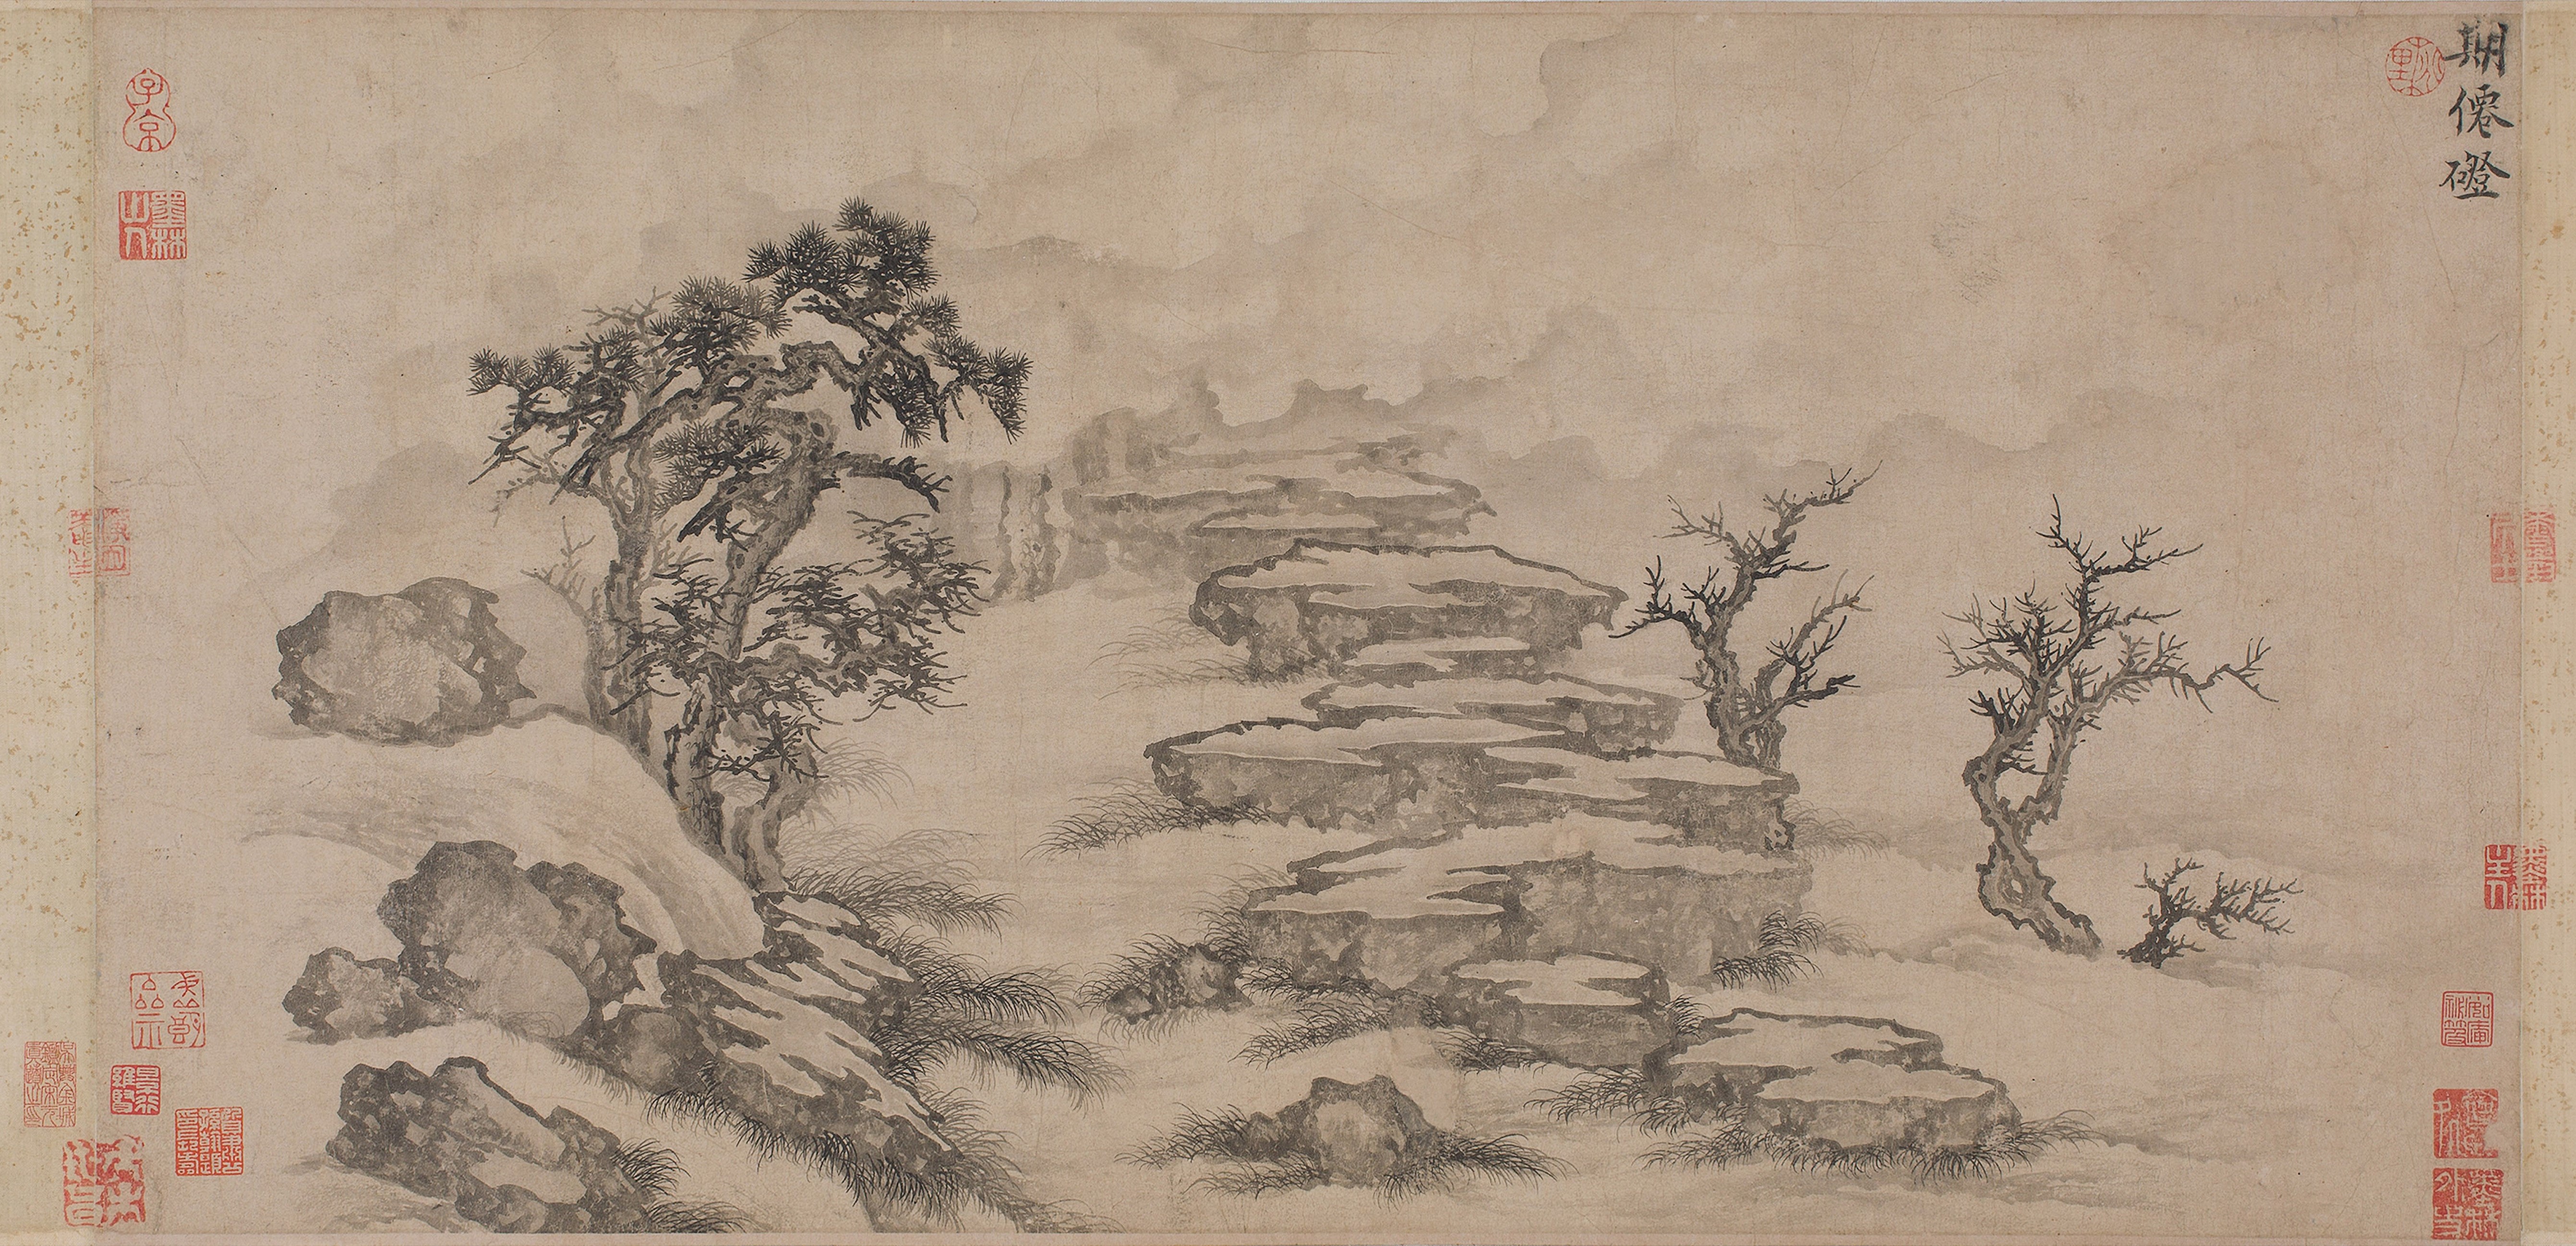 China Painting Chinese Culture 5366x2595